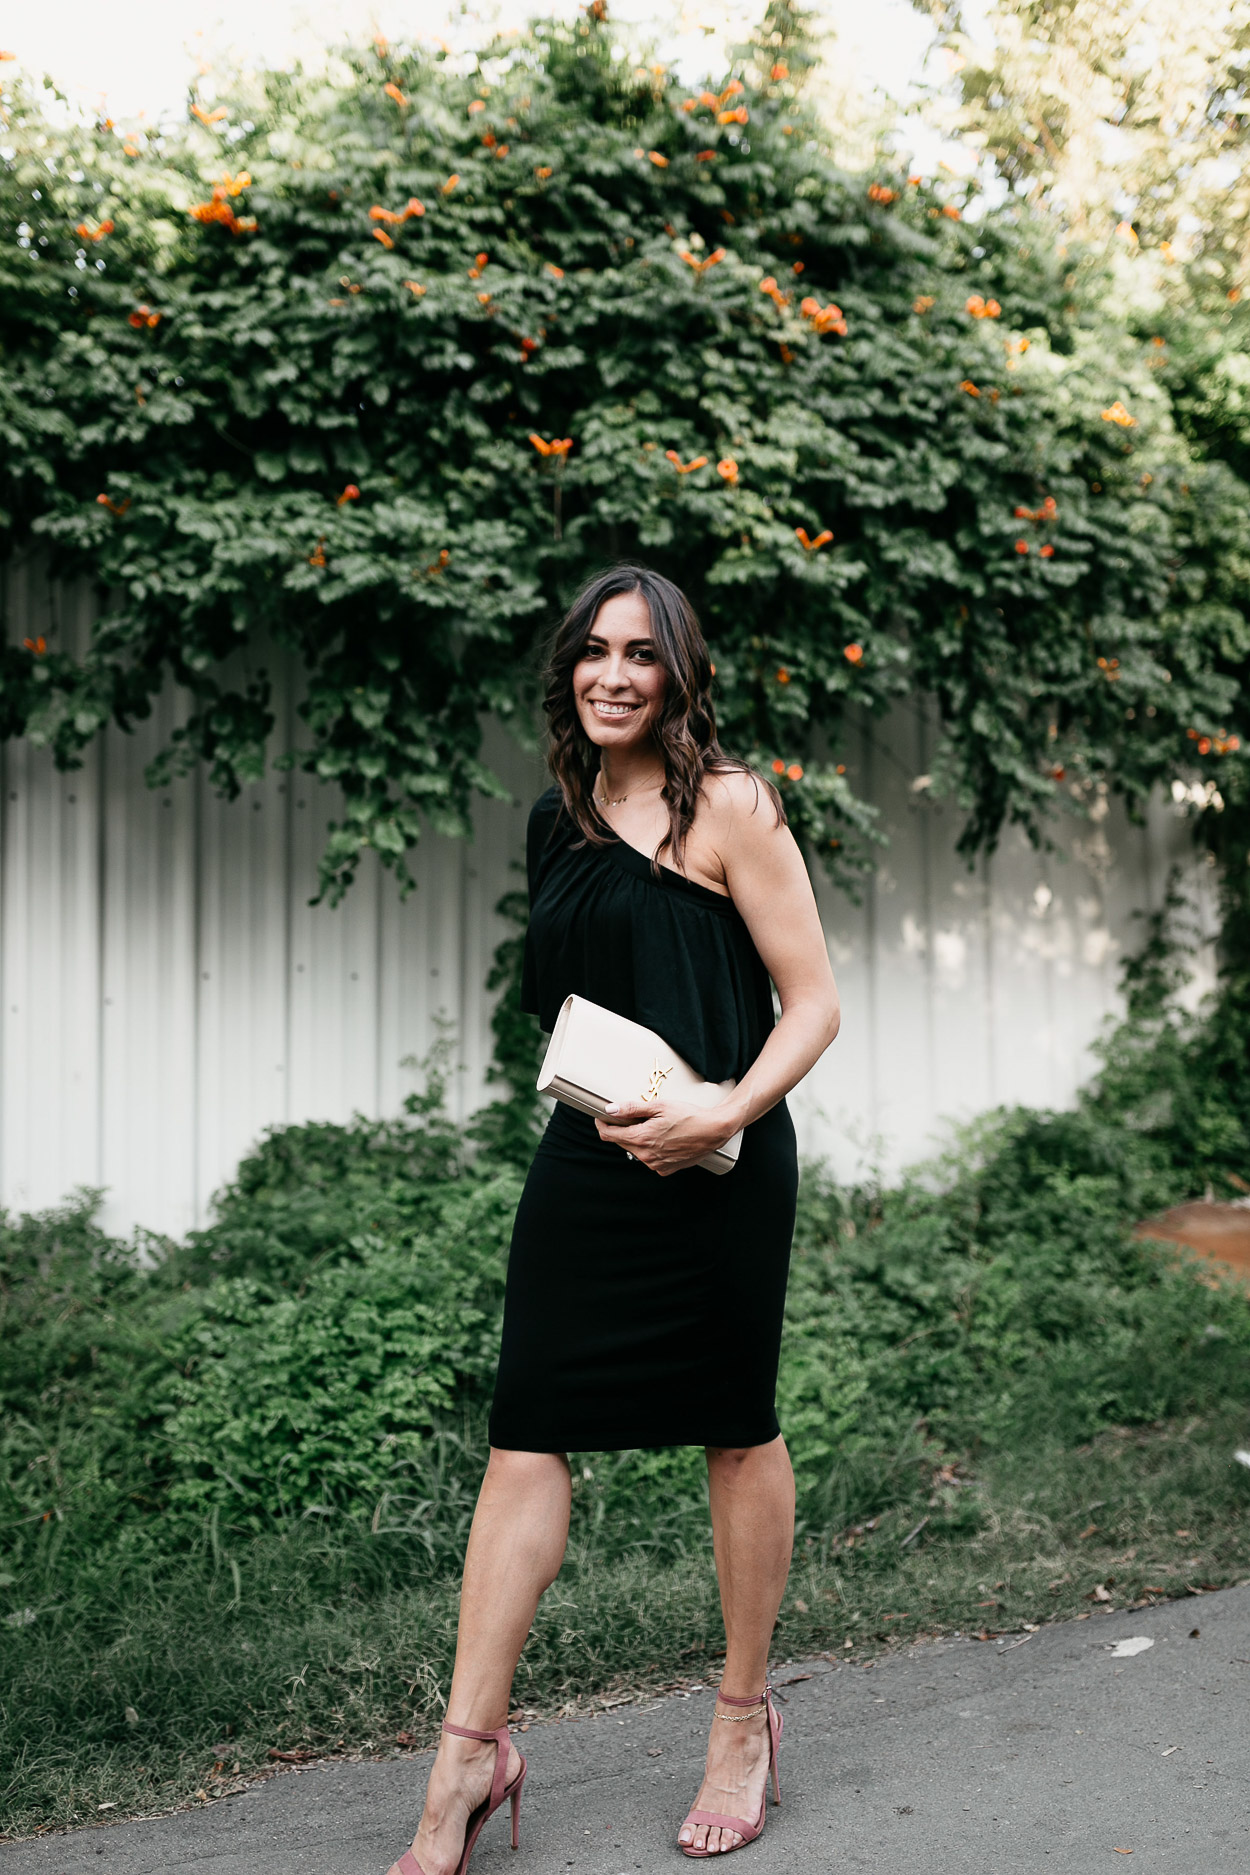 Classic LBD takes a turn with this black ruffle dress by Three Dots as styled by AGlamLifestyle blogger for date night